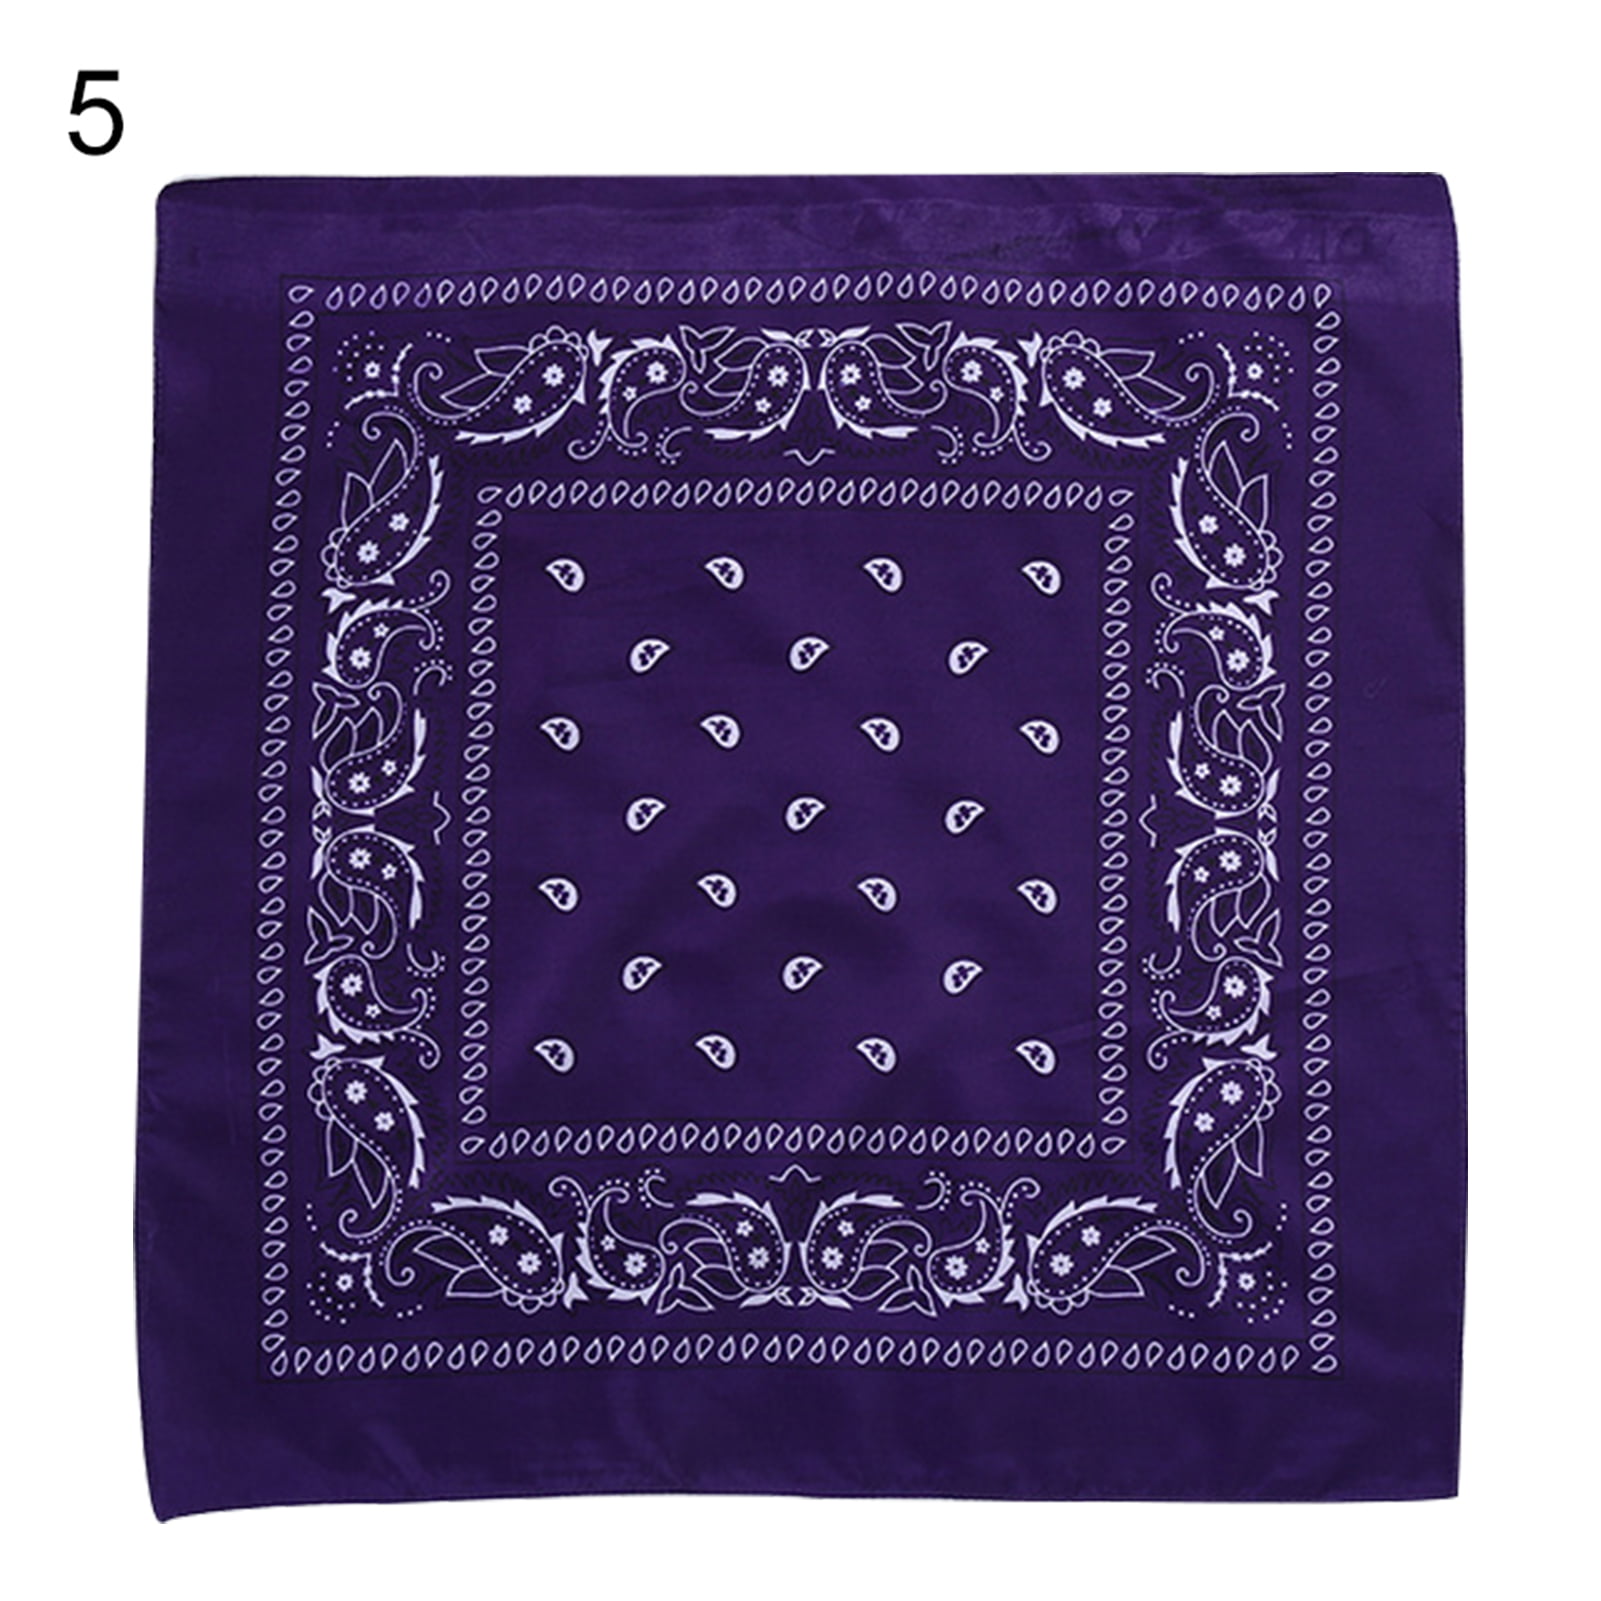 Bandana for Cowboy Hip-Hop 100% Square Scarf Ideal Balaclavas, for Handkerchief Manunclaims and Face DIY Women Dogs Paisley Headbands Suitable Cycling Scarf Cotton Bandana Men, For &